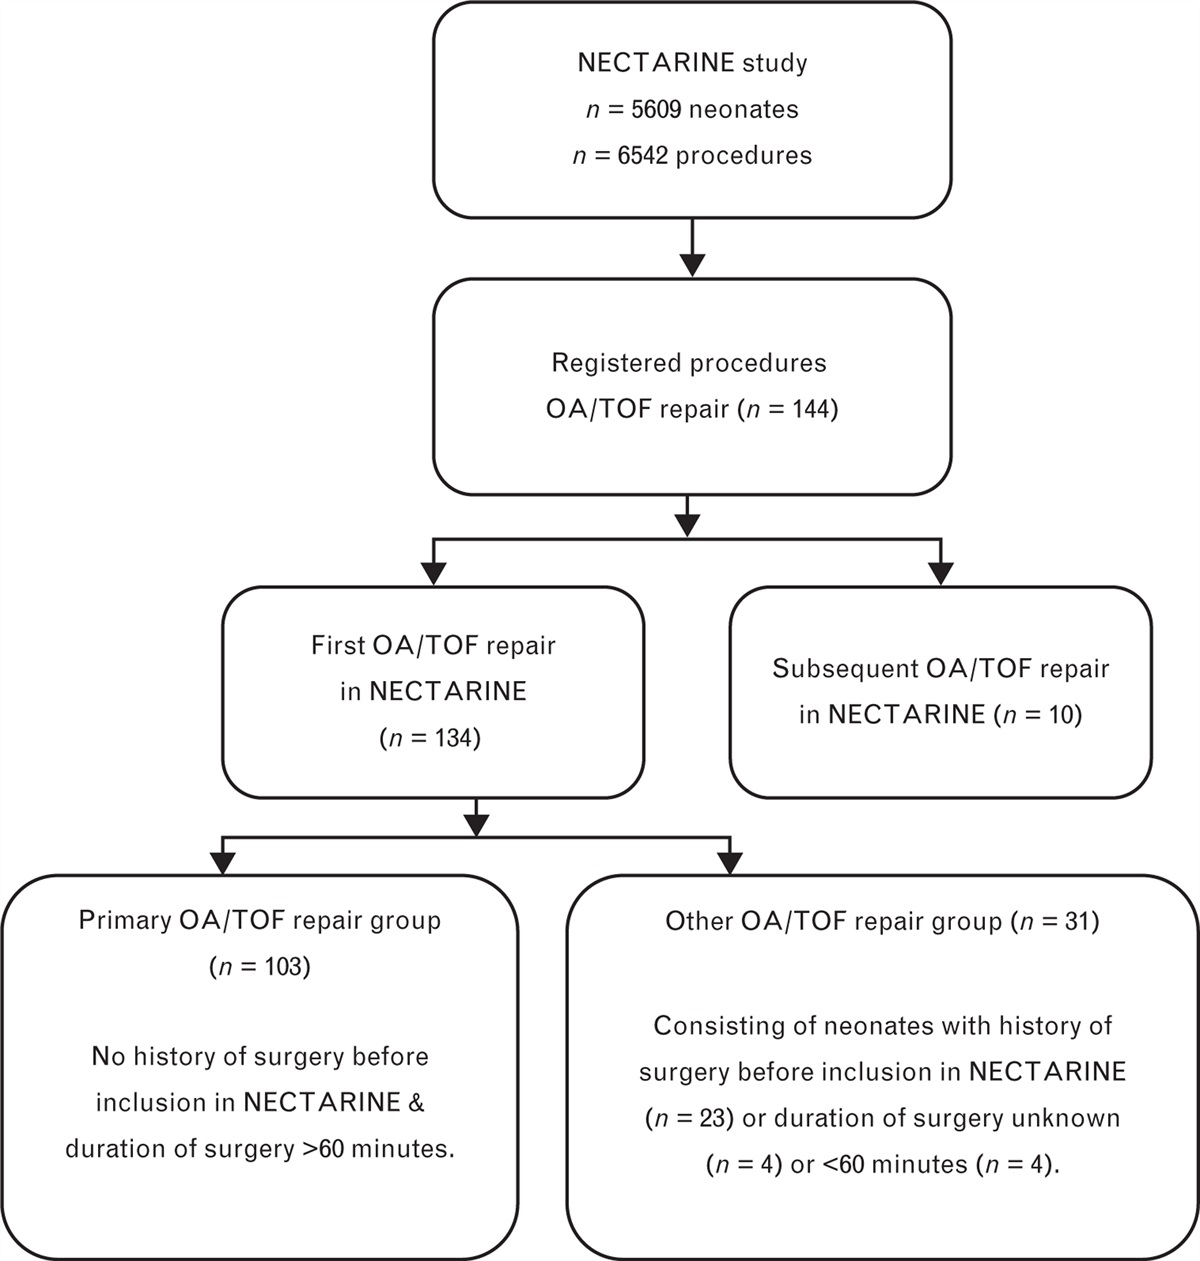 Perioperative anaesthetic management and short-term outcome of neonatal repair of oesophageal atresia with or without tracheo-oesophageal fistula in Europe: A sub-analysis of the neonate and children audit of anaesthesia practice in Europe (NECTARINE) prospective multicenter observational study